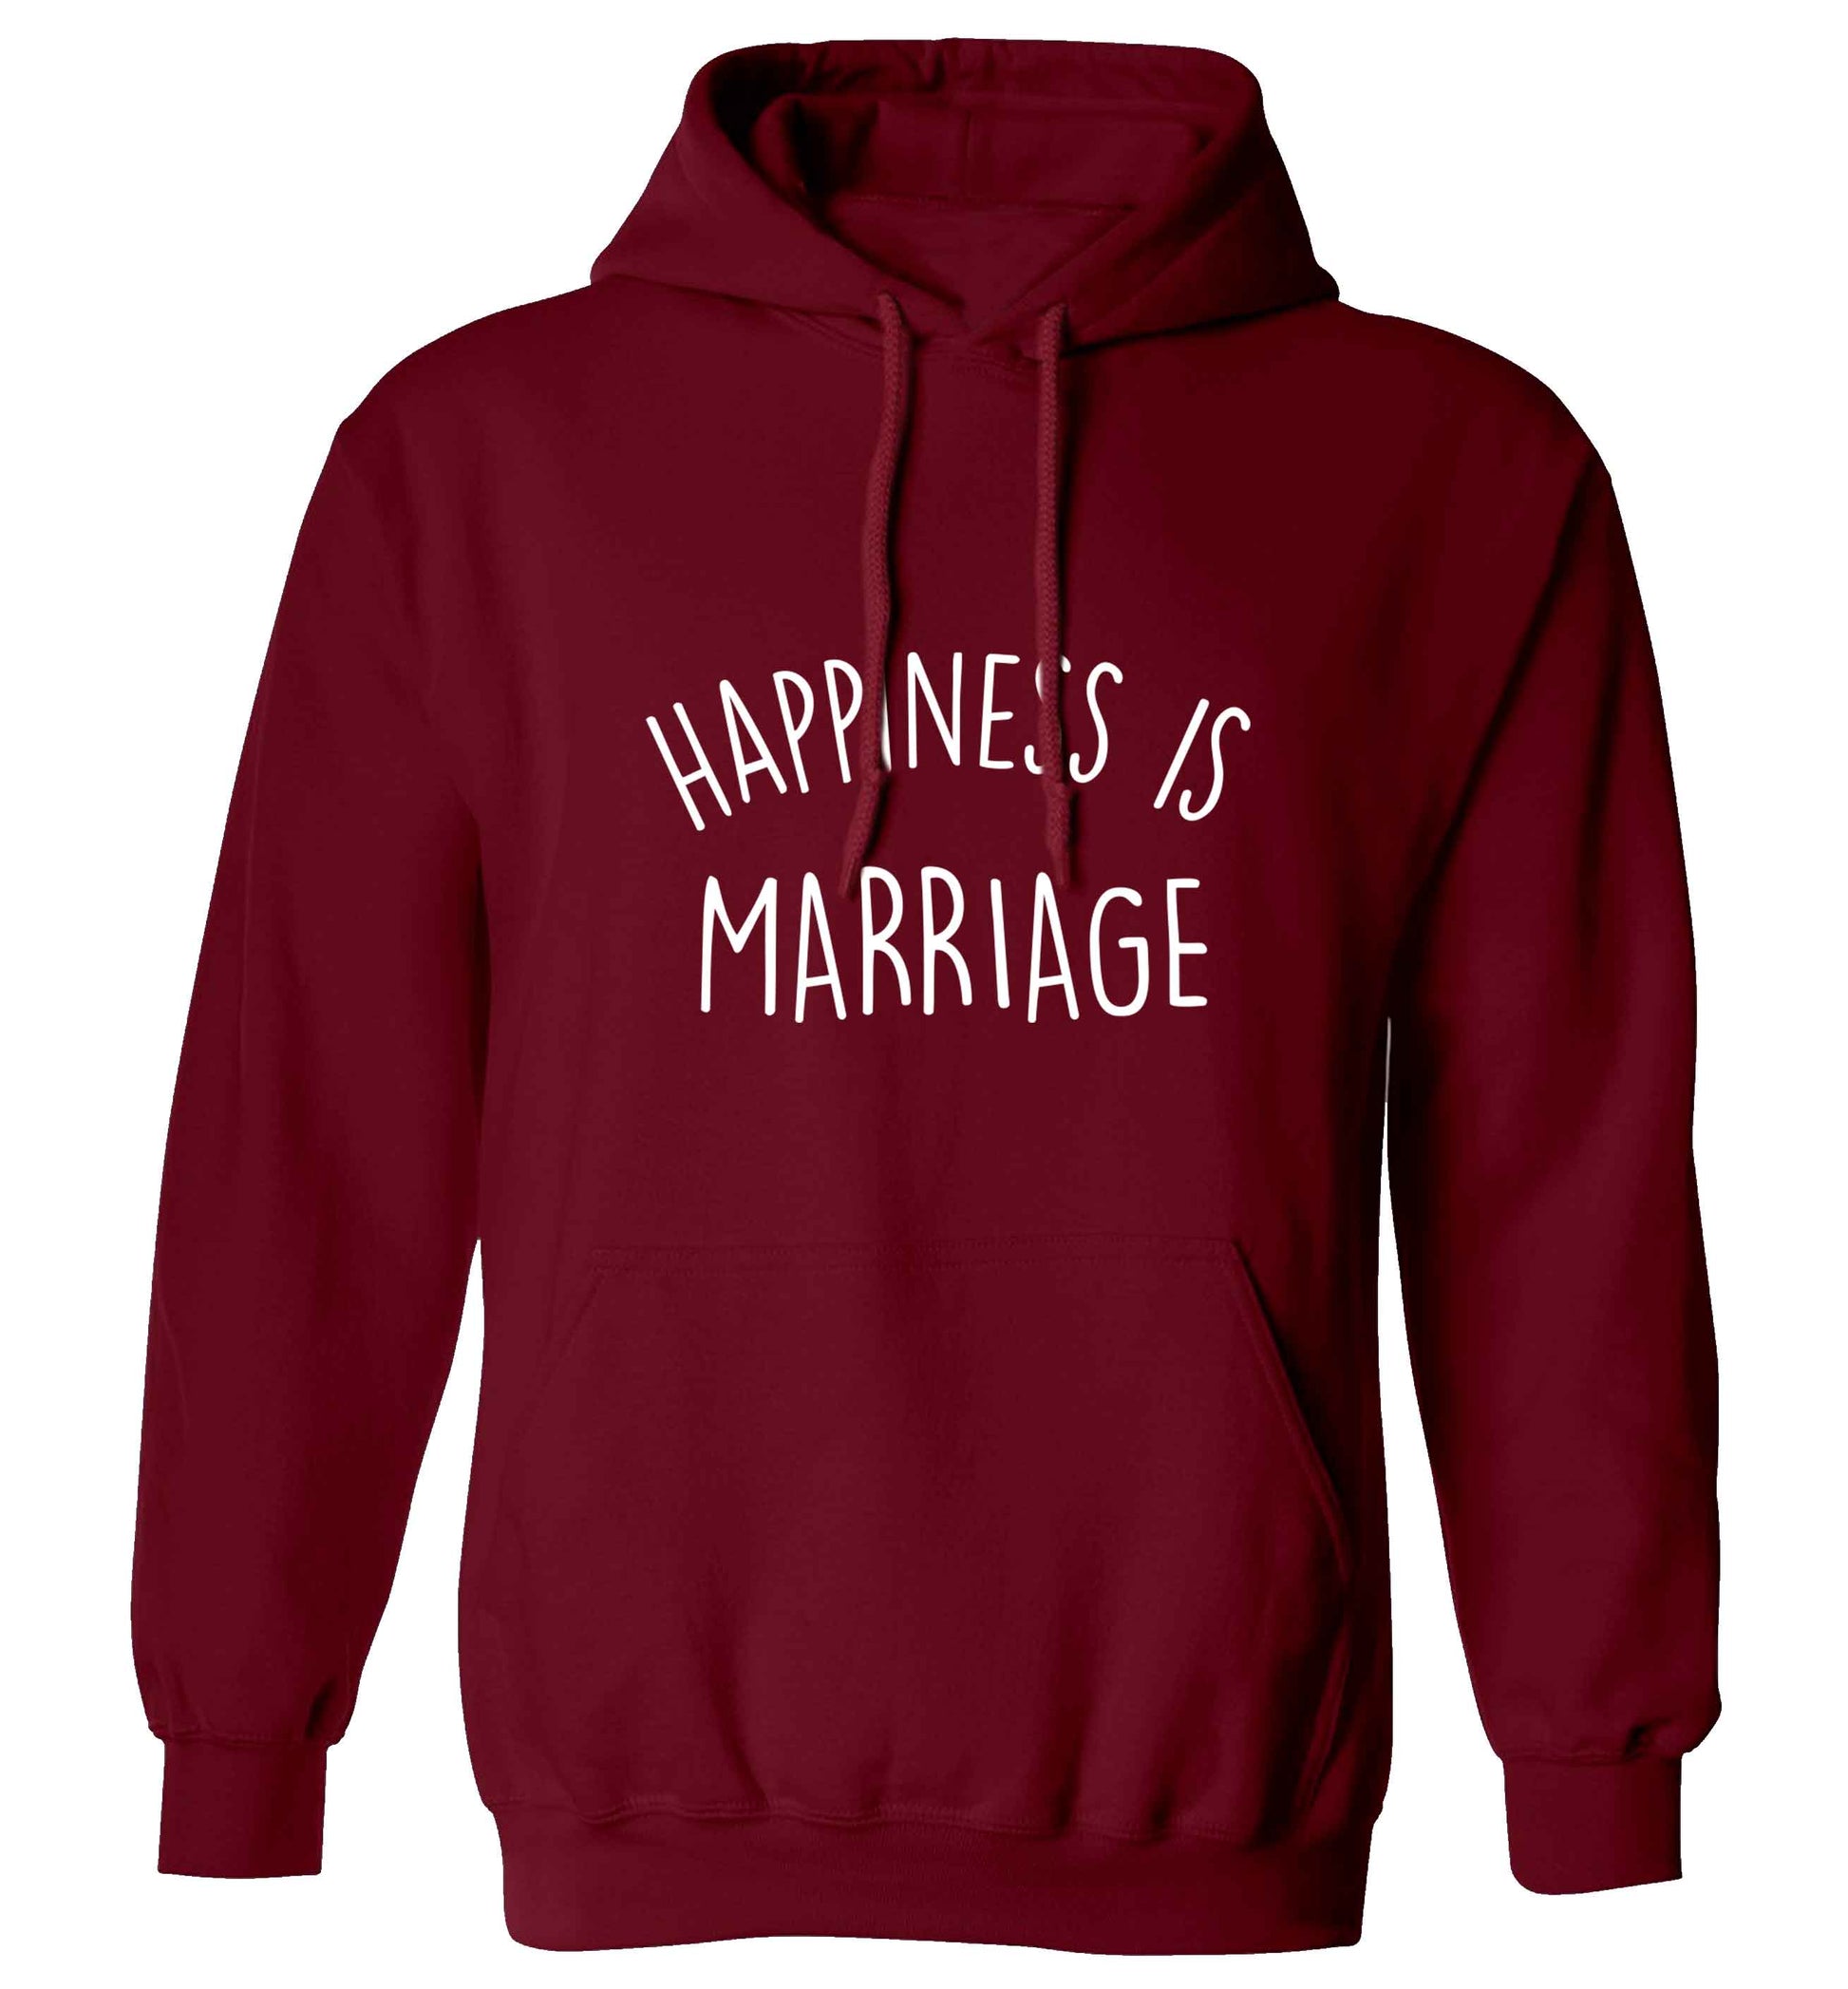 Happiness is wedding planning adults unisex maroon hoodie 2XL